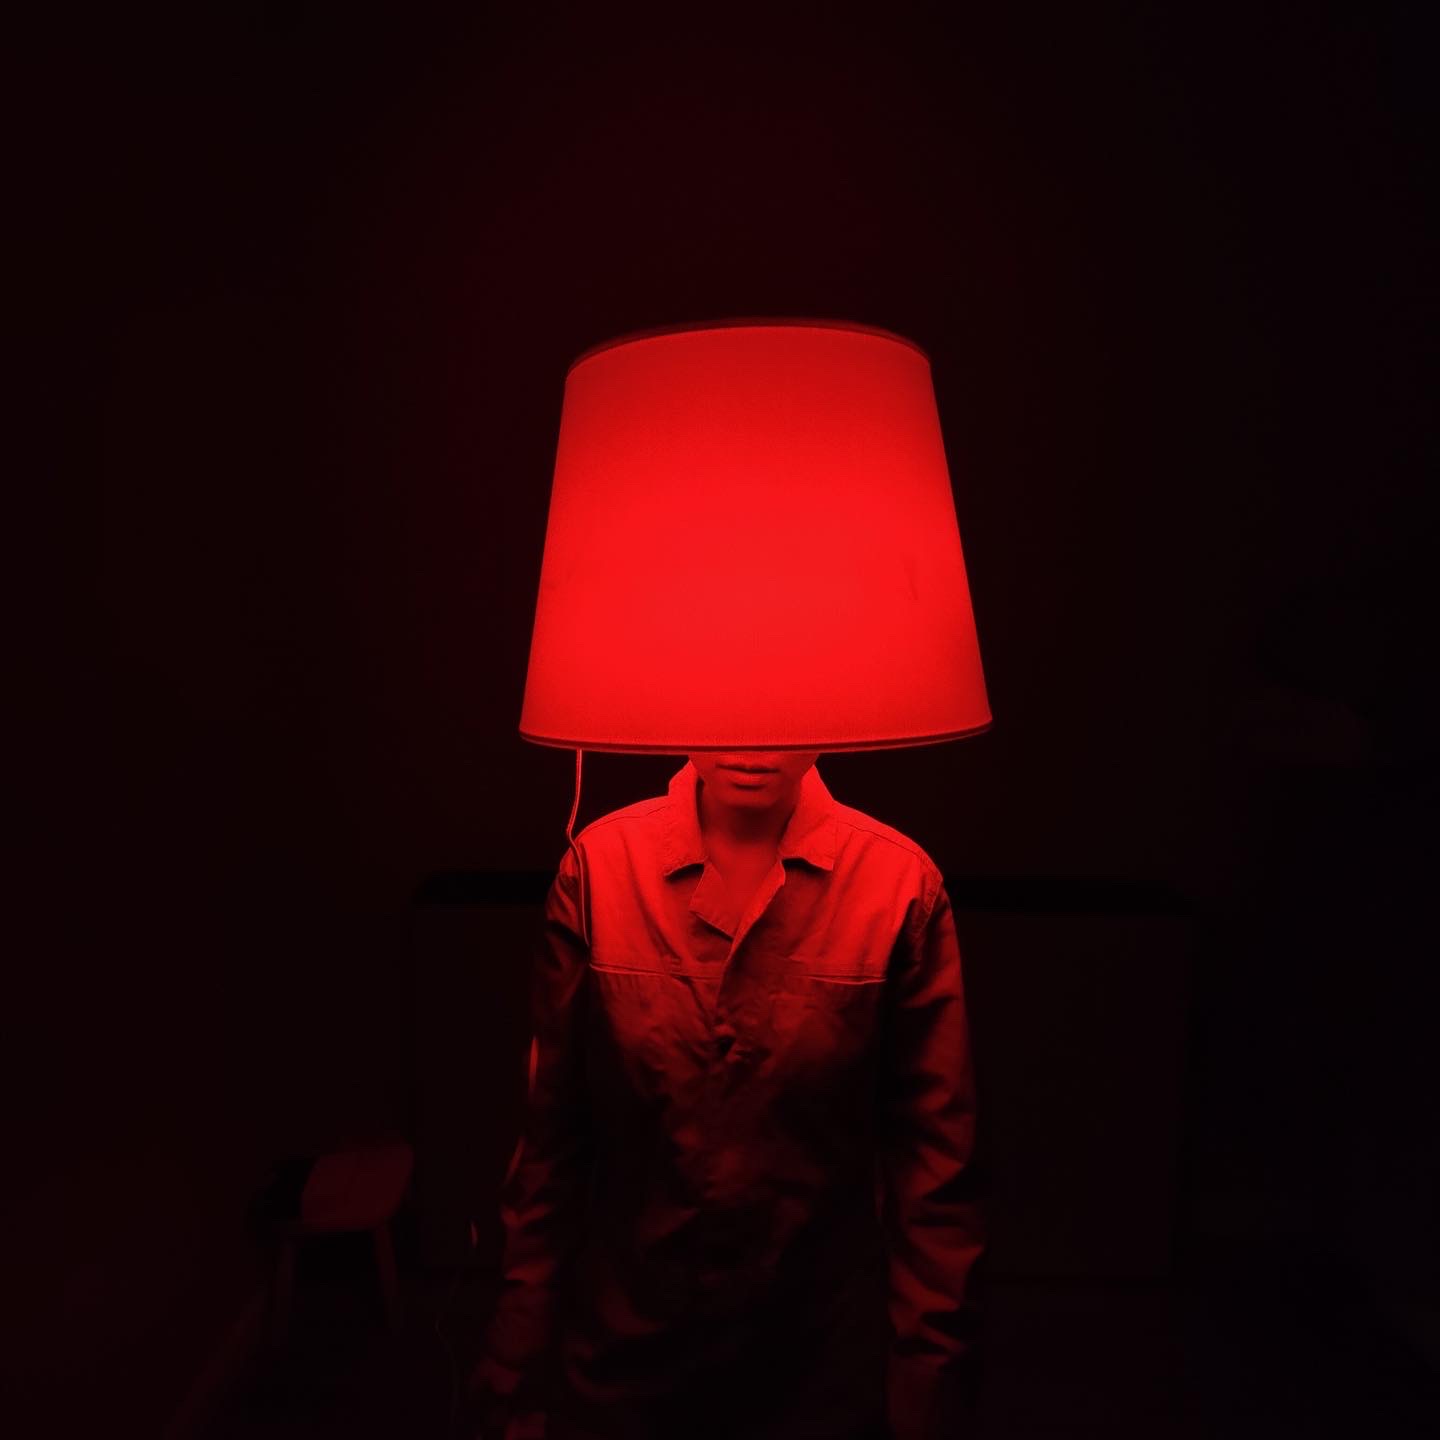 Person illuminated in red with a lamp shade on their head